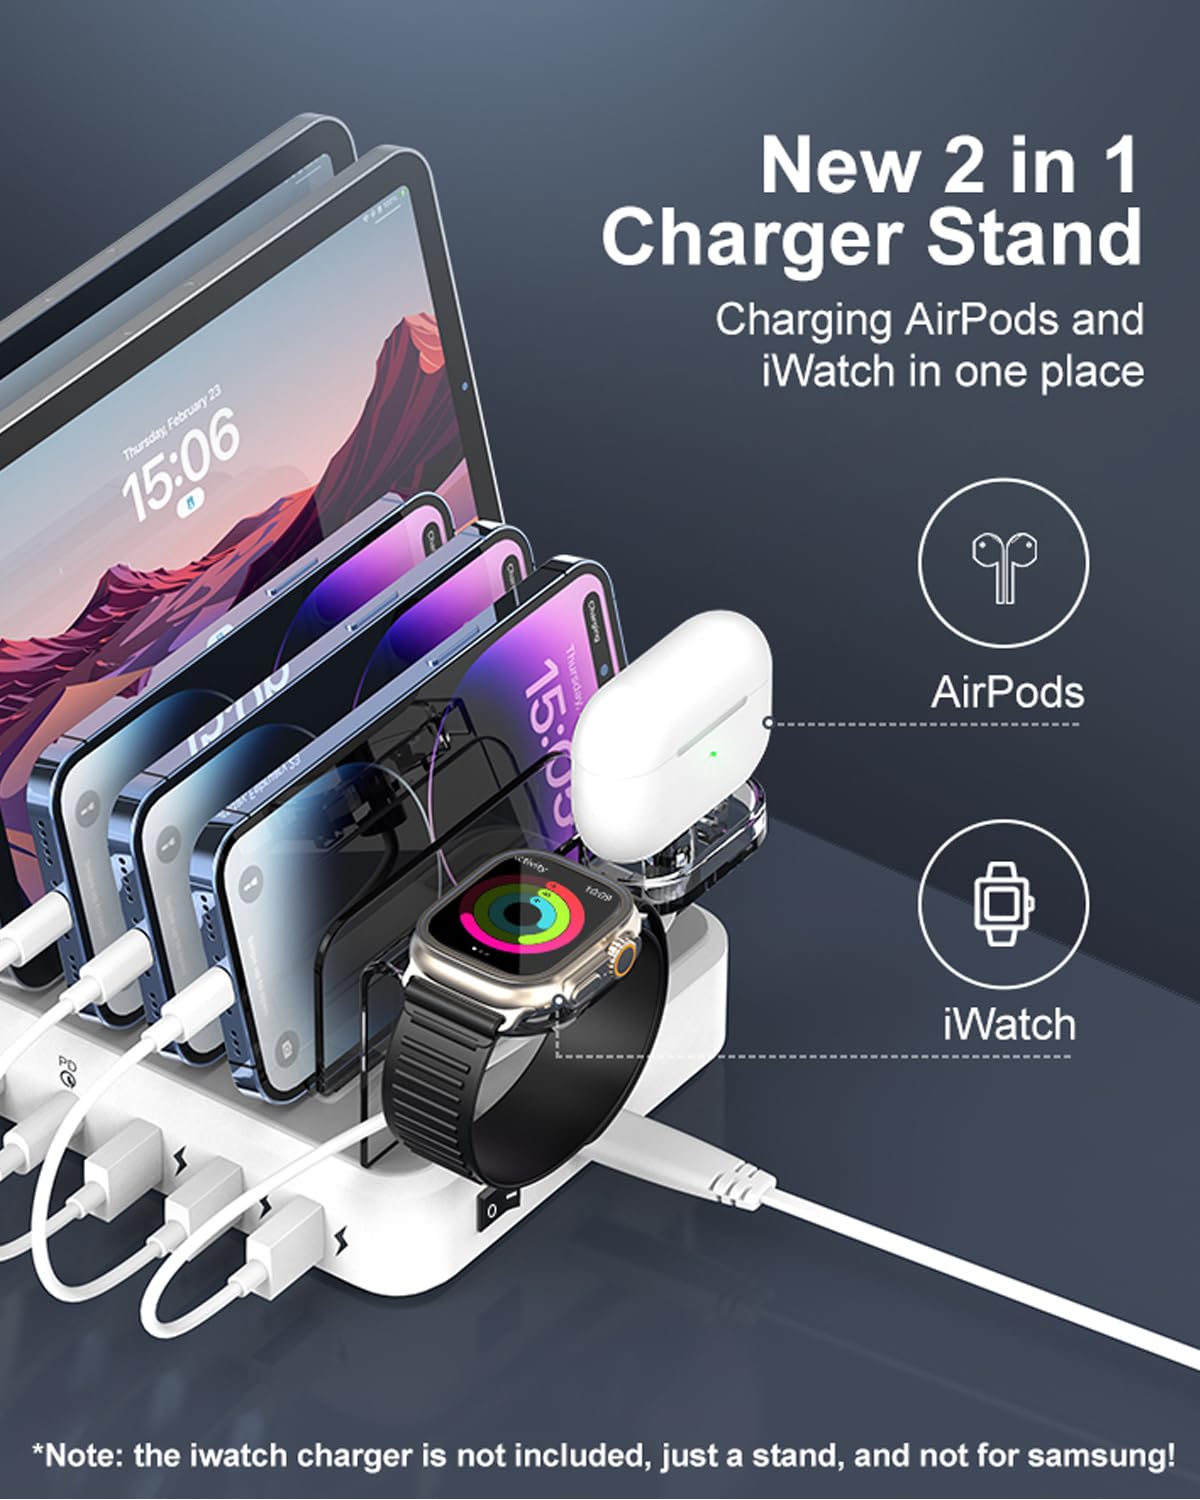 Charging Station for Apple Devices - TYCRALI 81W 6 Port Charger Station with 20W*3 PD USB C Fast Port, 6 Short Cables, Charging Dock for Multiple Devices Designed for iPhone iPad Android